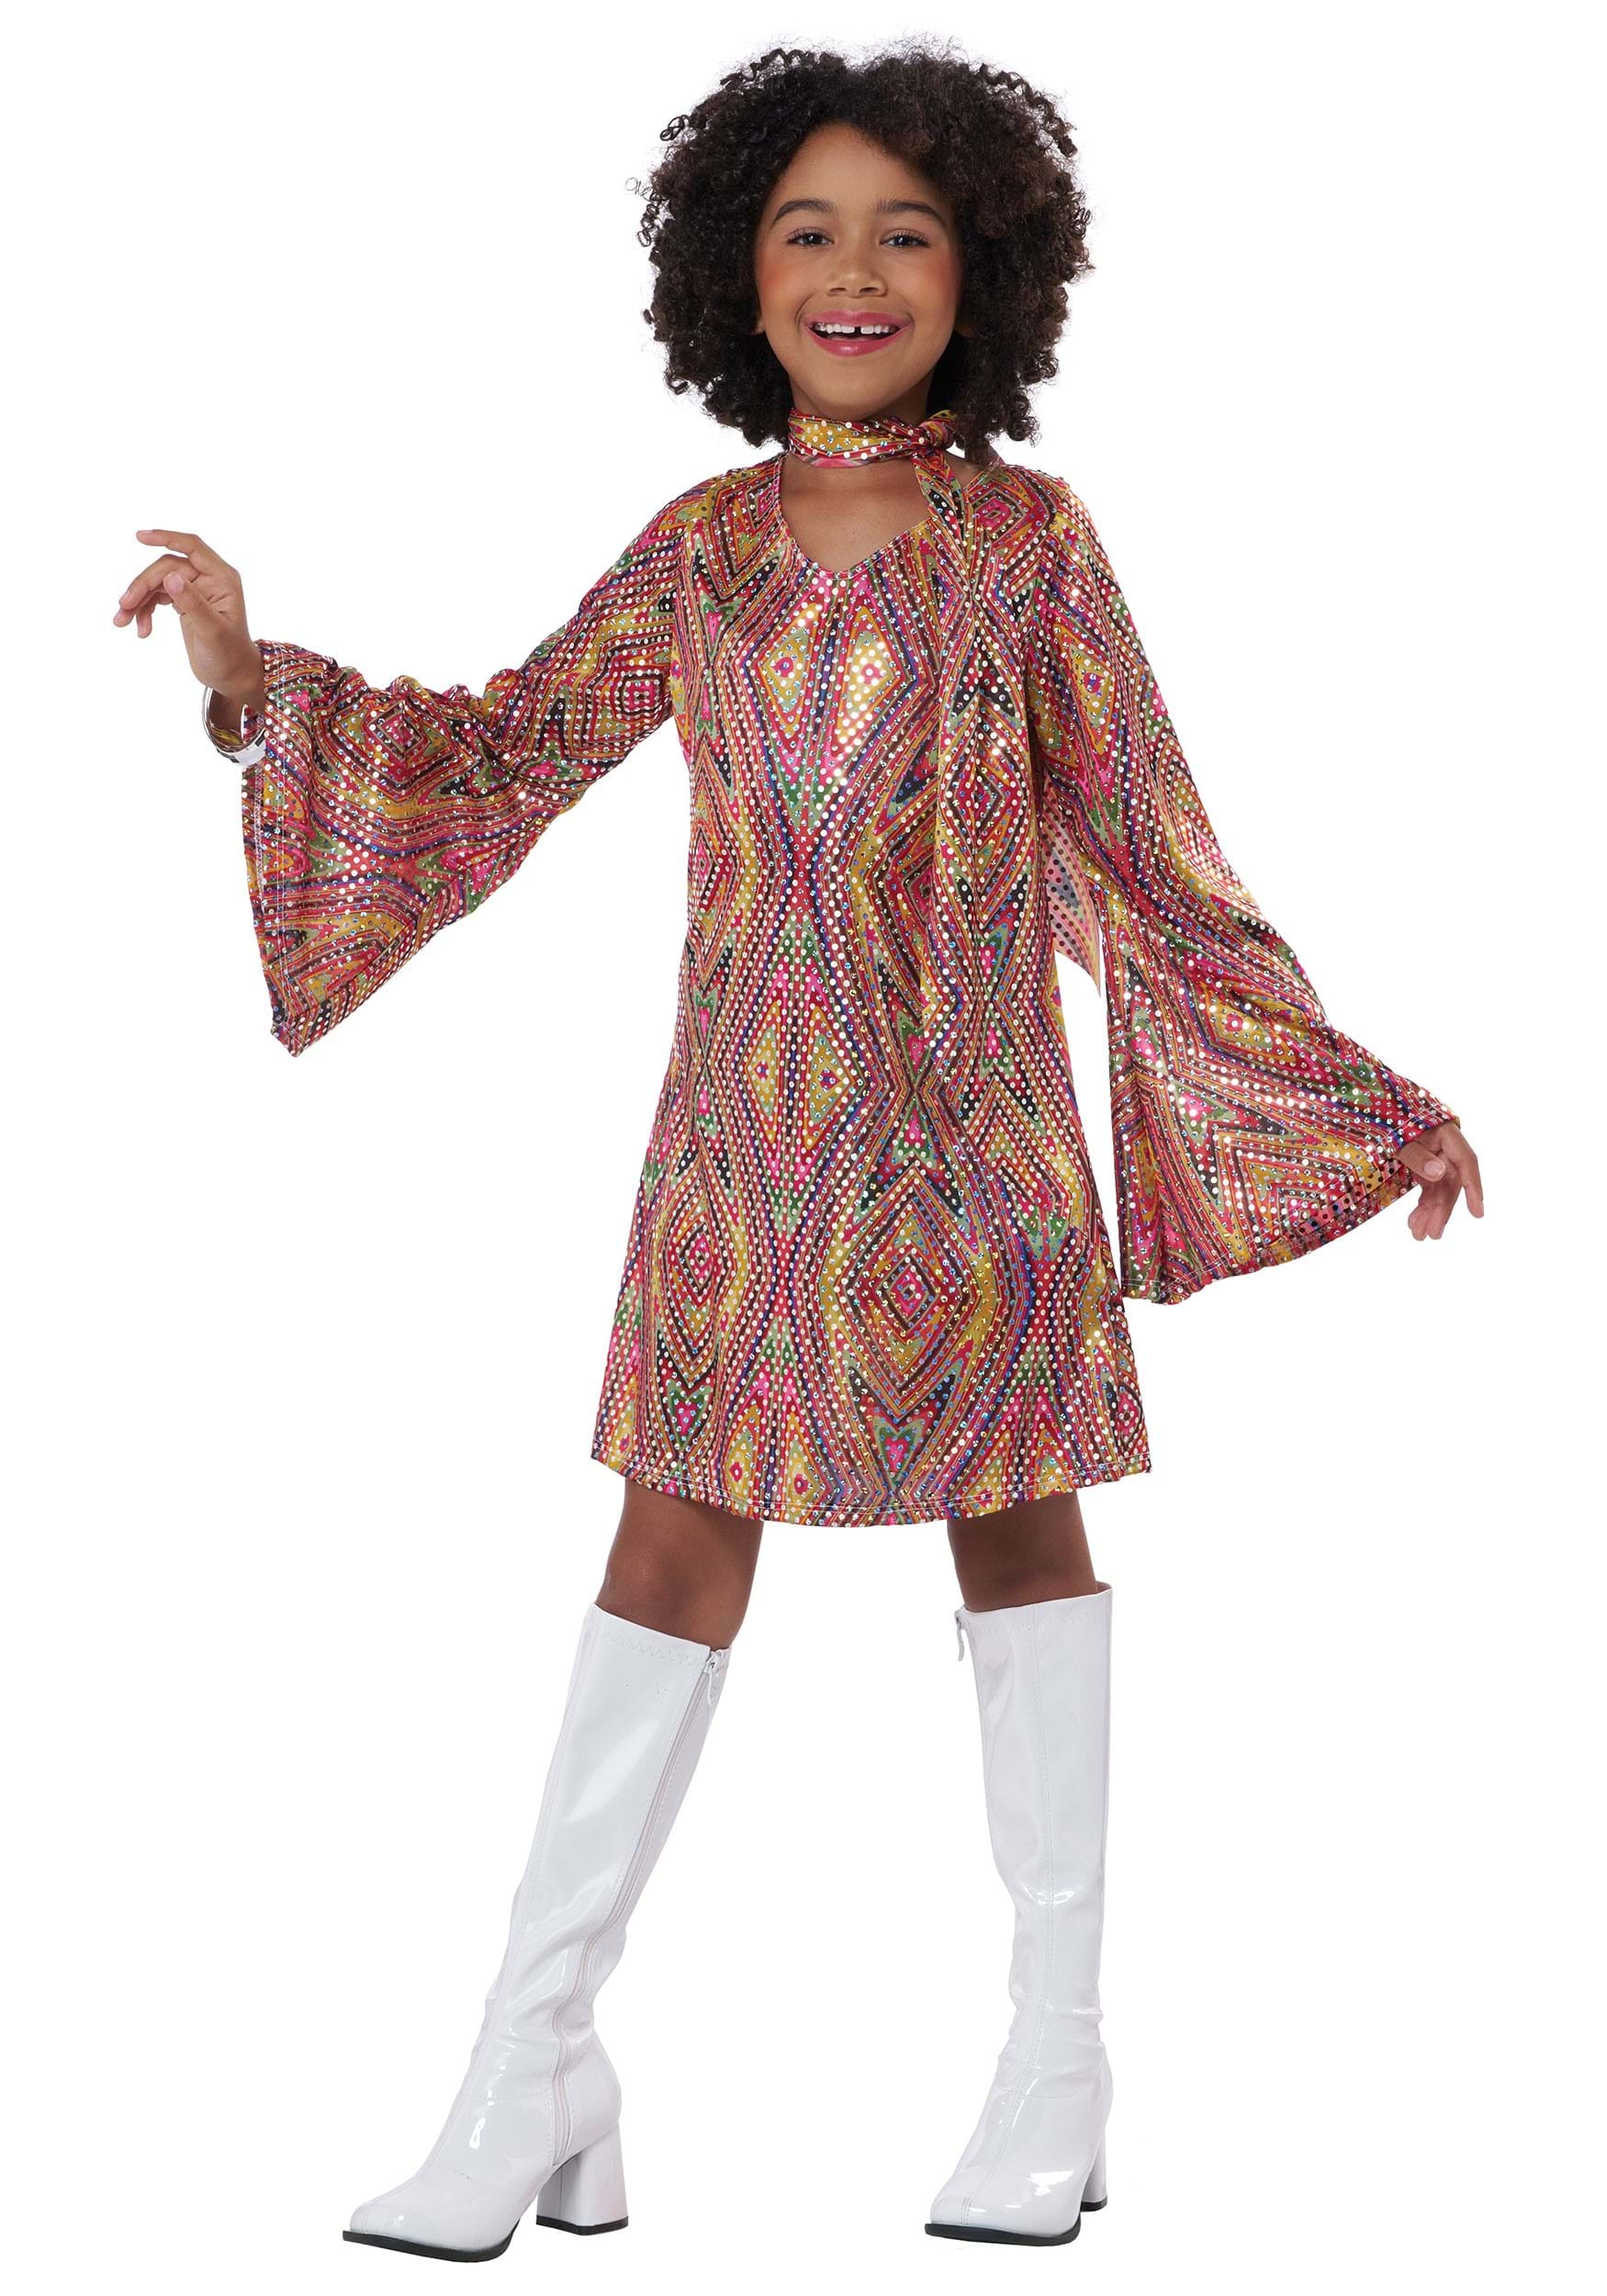 Wild Flower Child 60s Costume for Women - Extra Large